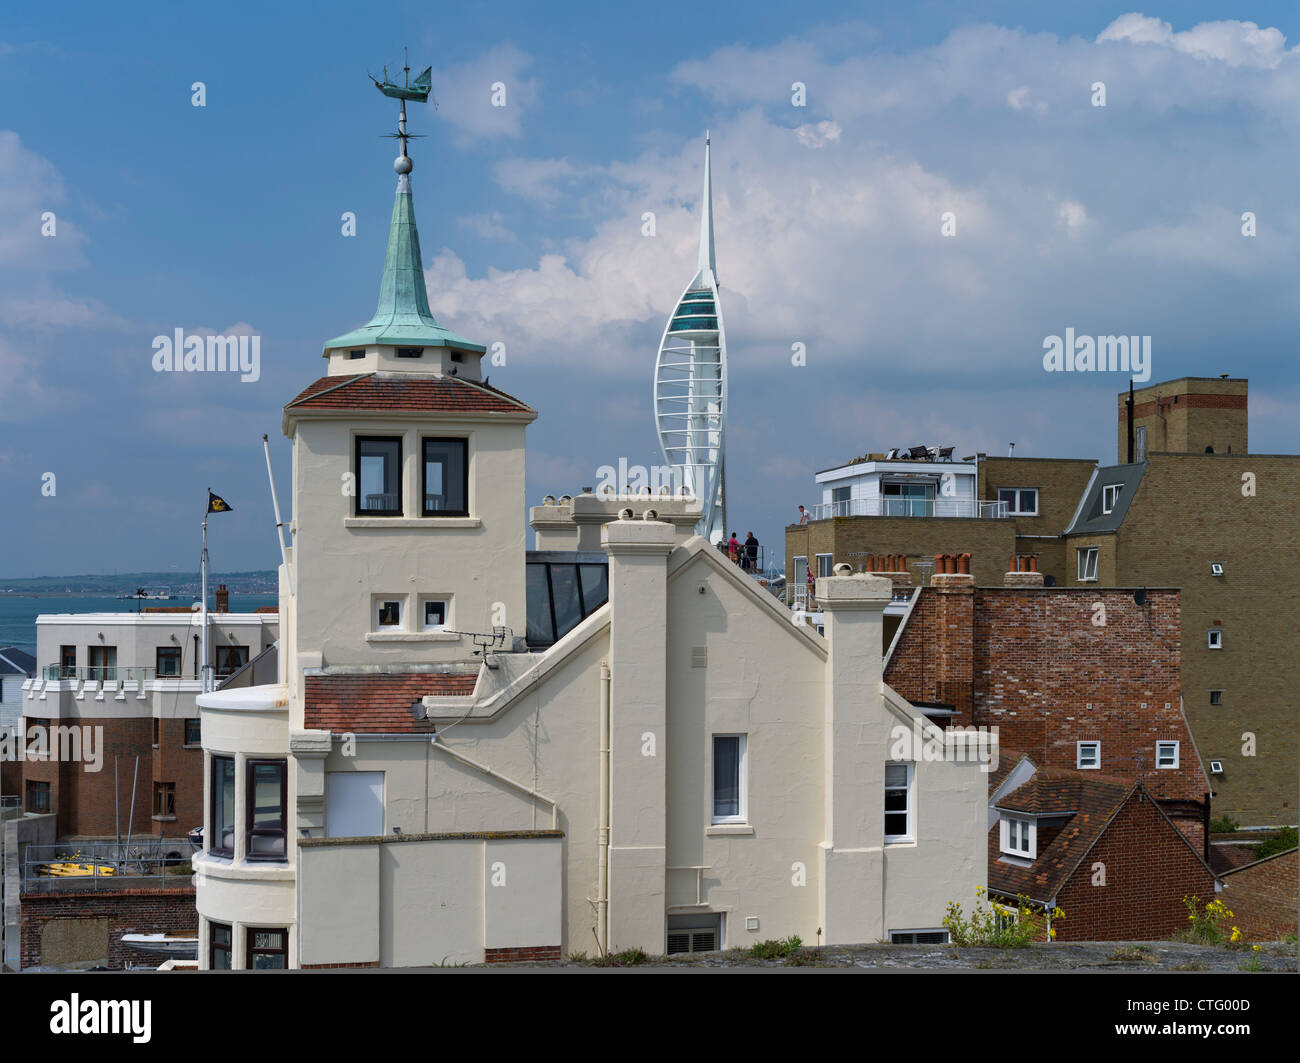 dh Old Portsmouth PORTSMOUTH HAMPSHIRE Naval house architecture building Portsmouth Harbour area flats city uk Stock Photo